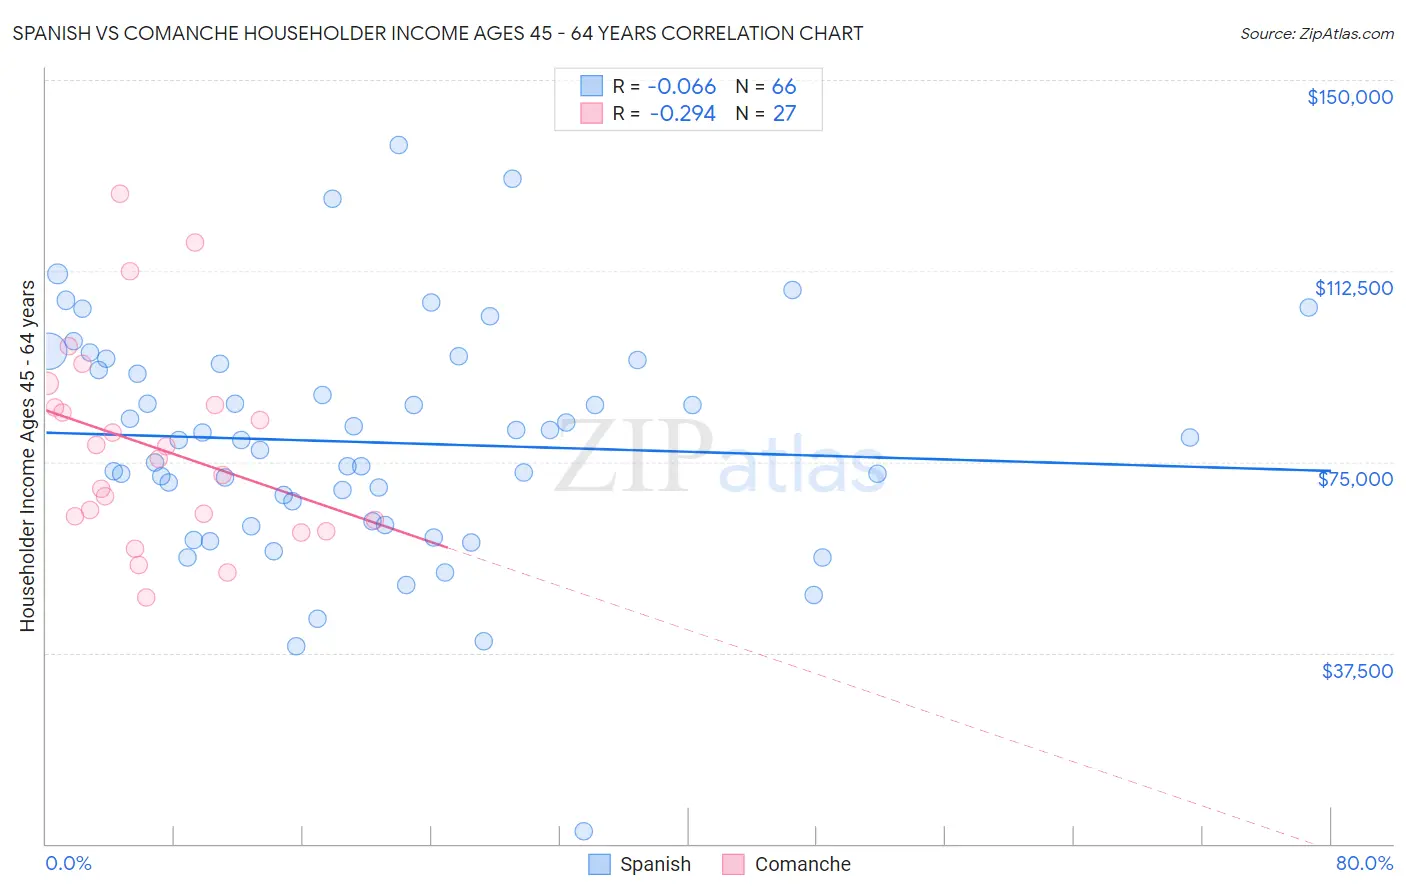 Spanish vs Comanche Householder Income Ages 45 - 64 years